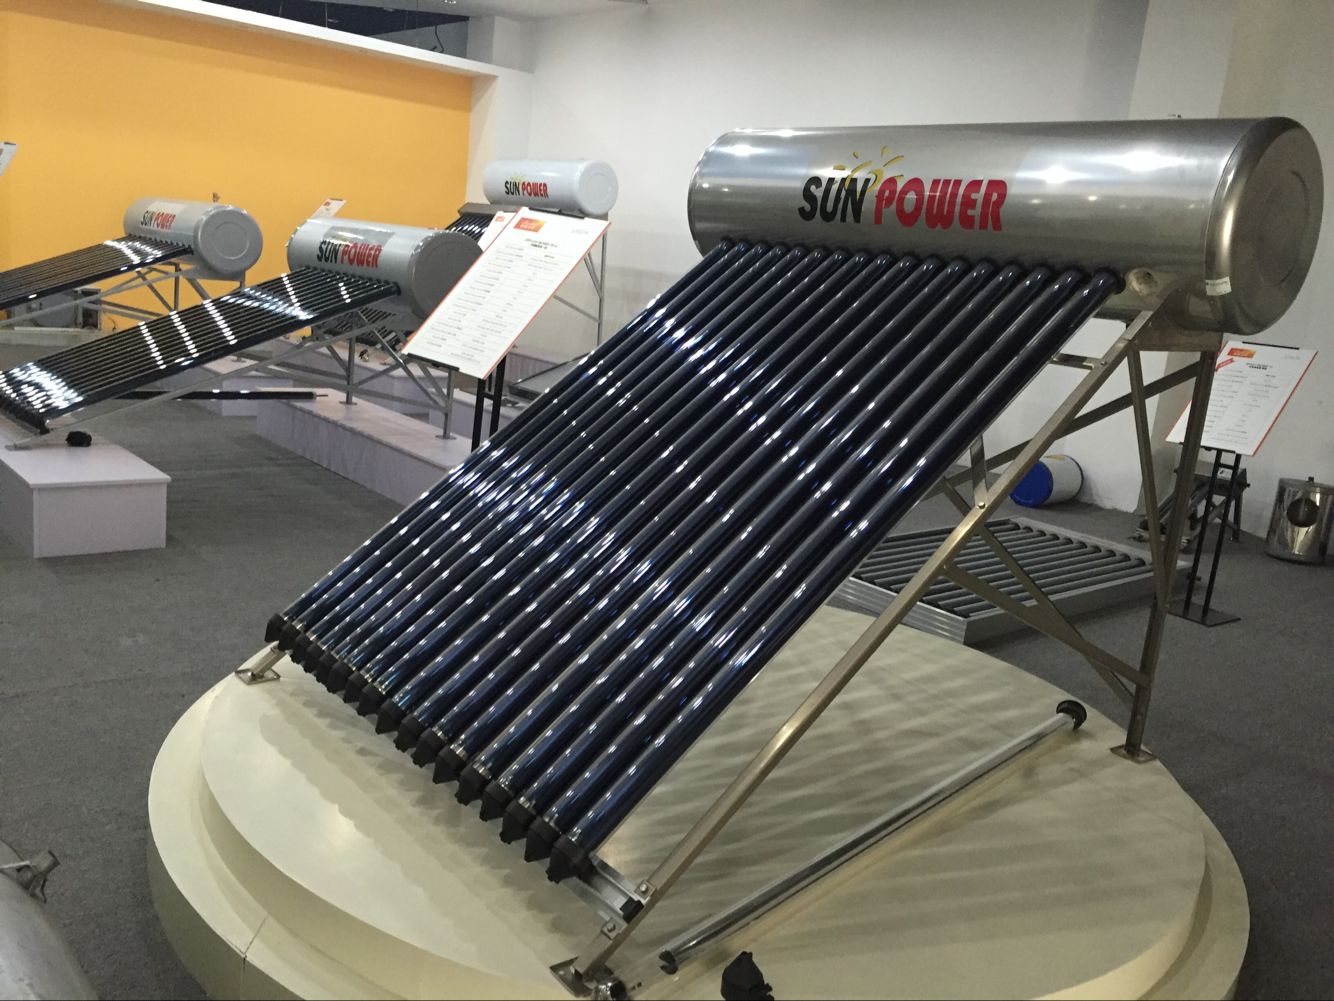 Compact Pressurized Solar Water Heater Buy Solar Water Heater, compact solar water heater for